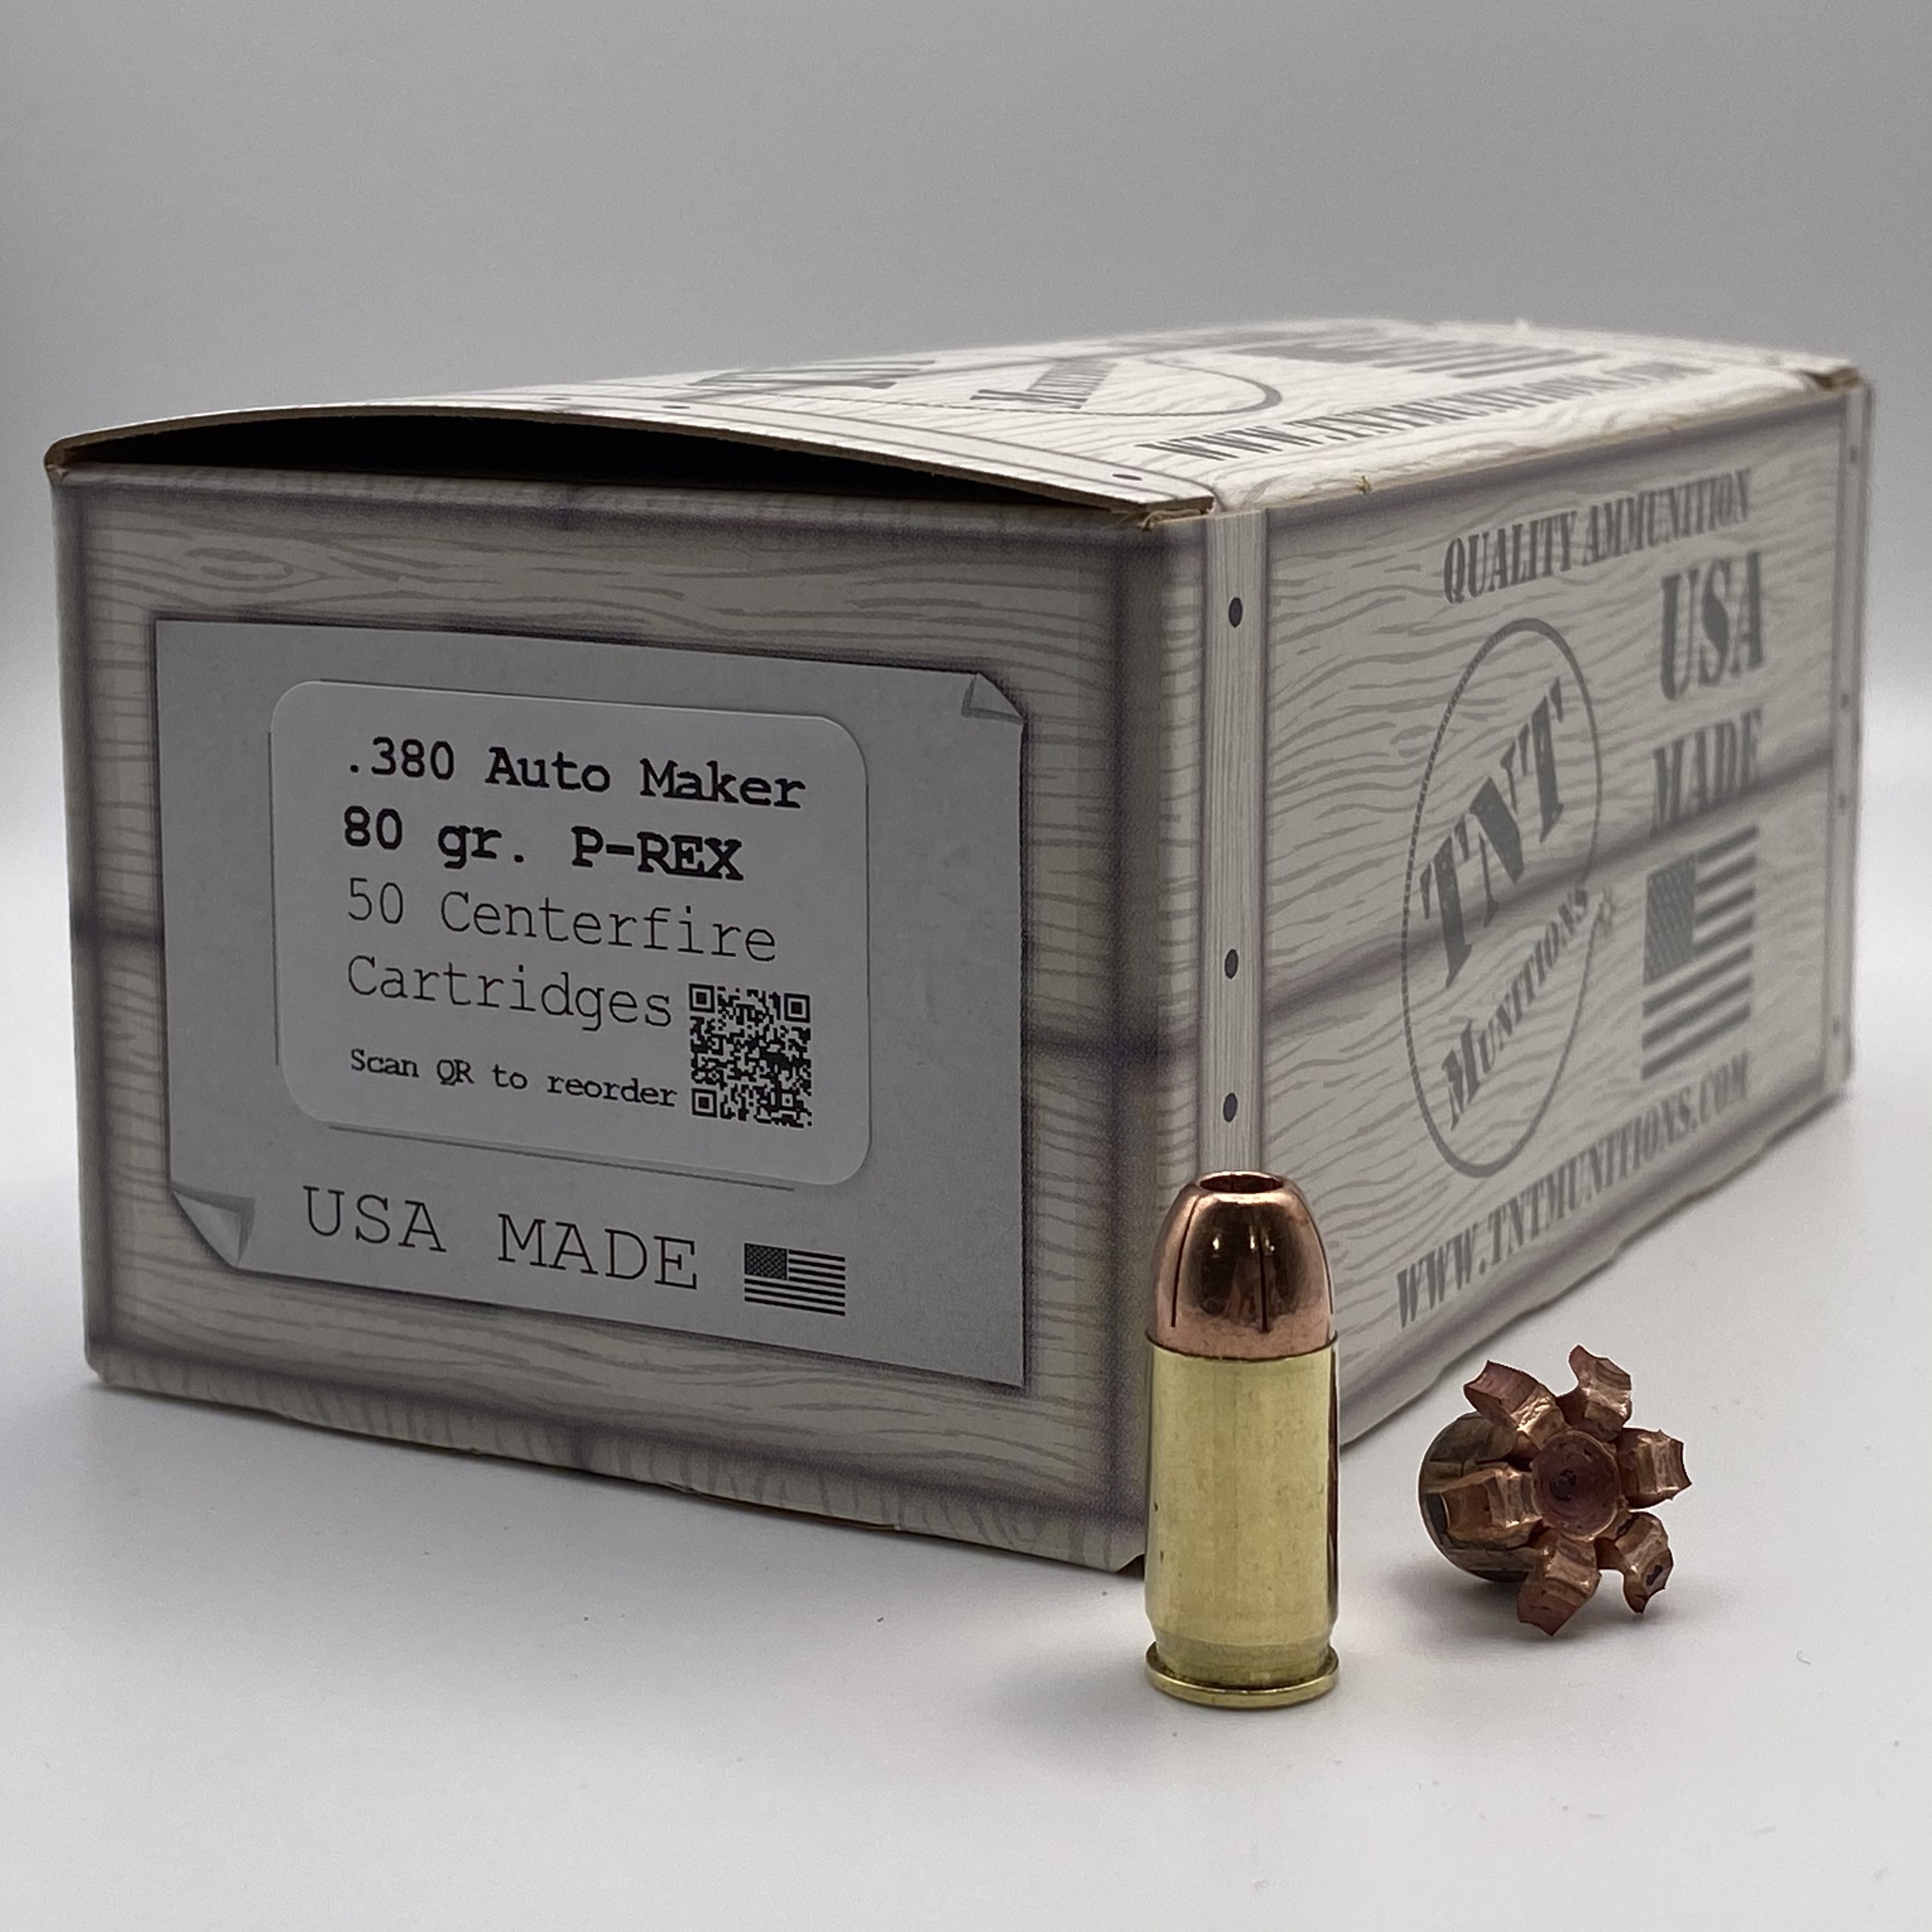 .380 Auto 80 gr. Maker P-REX. MEMORIAL DAY SALE! THROUGH MAY 29TH ONLY - SHIPS NBD  - (LEAD-FREE)